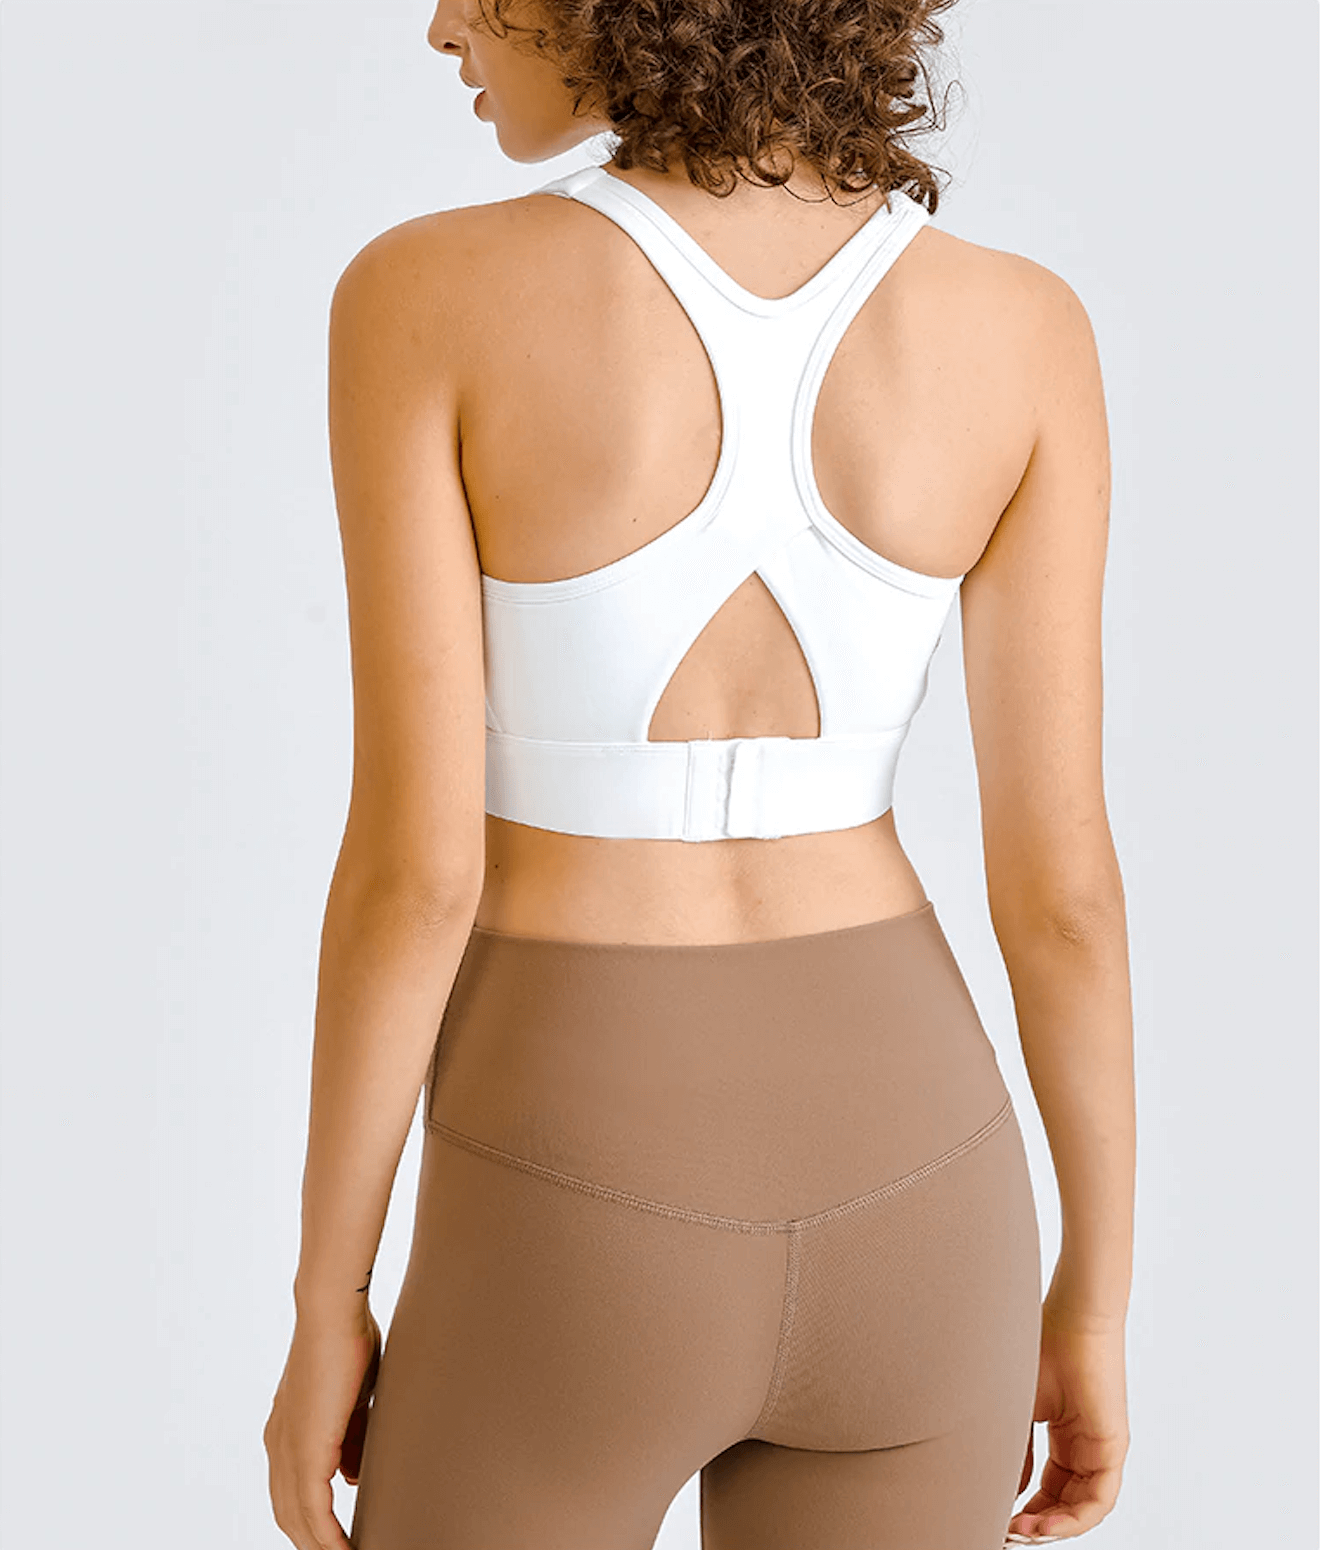 Best High Impact Sports Bras for running, large breasts